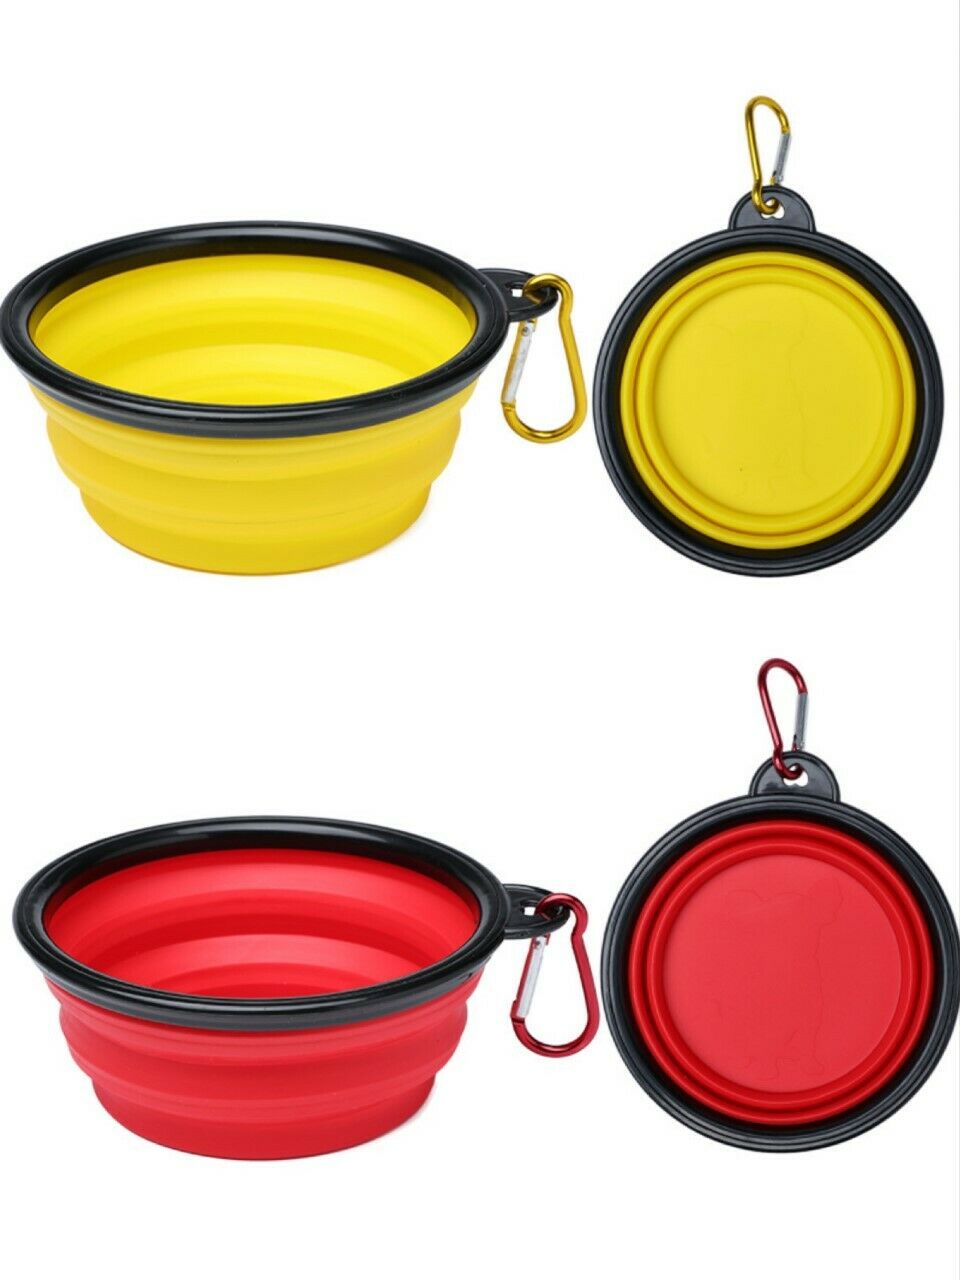 2 Collapsible Dog Cat Pet Bowls Food Water Feeding Silicone Portable Travel Bowl